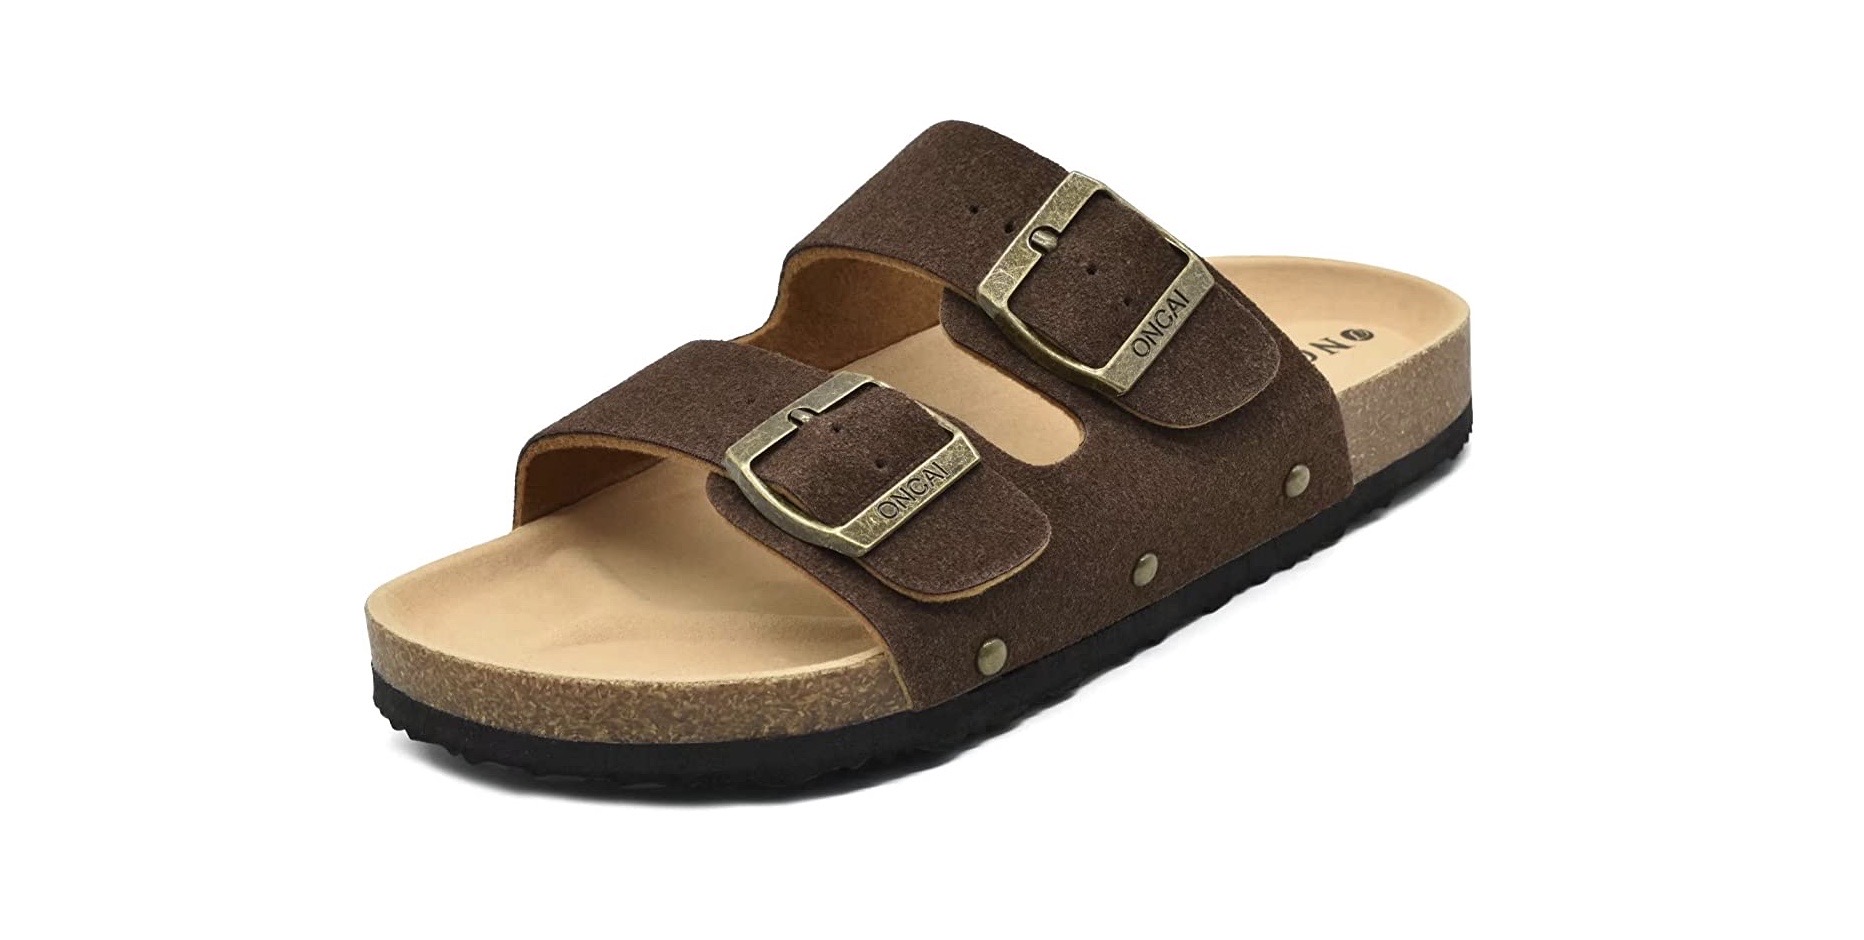 Birkenstocks Are Going for As Low As $49.99 for Cyber Monday - Parade